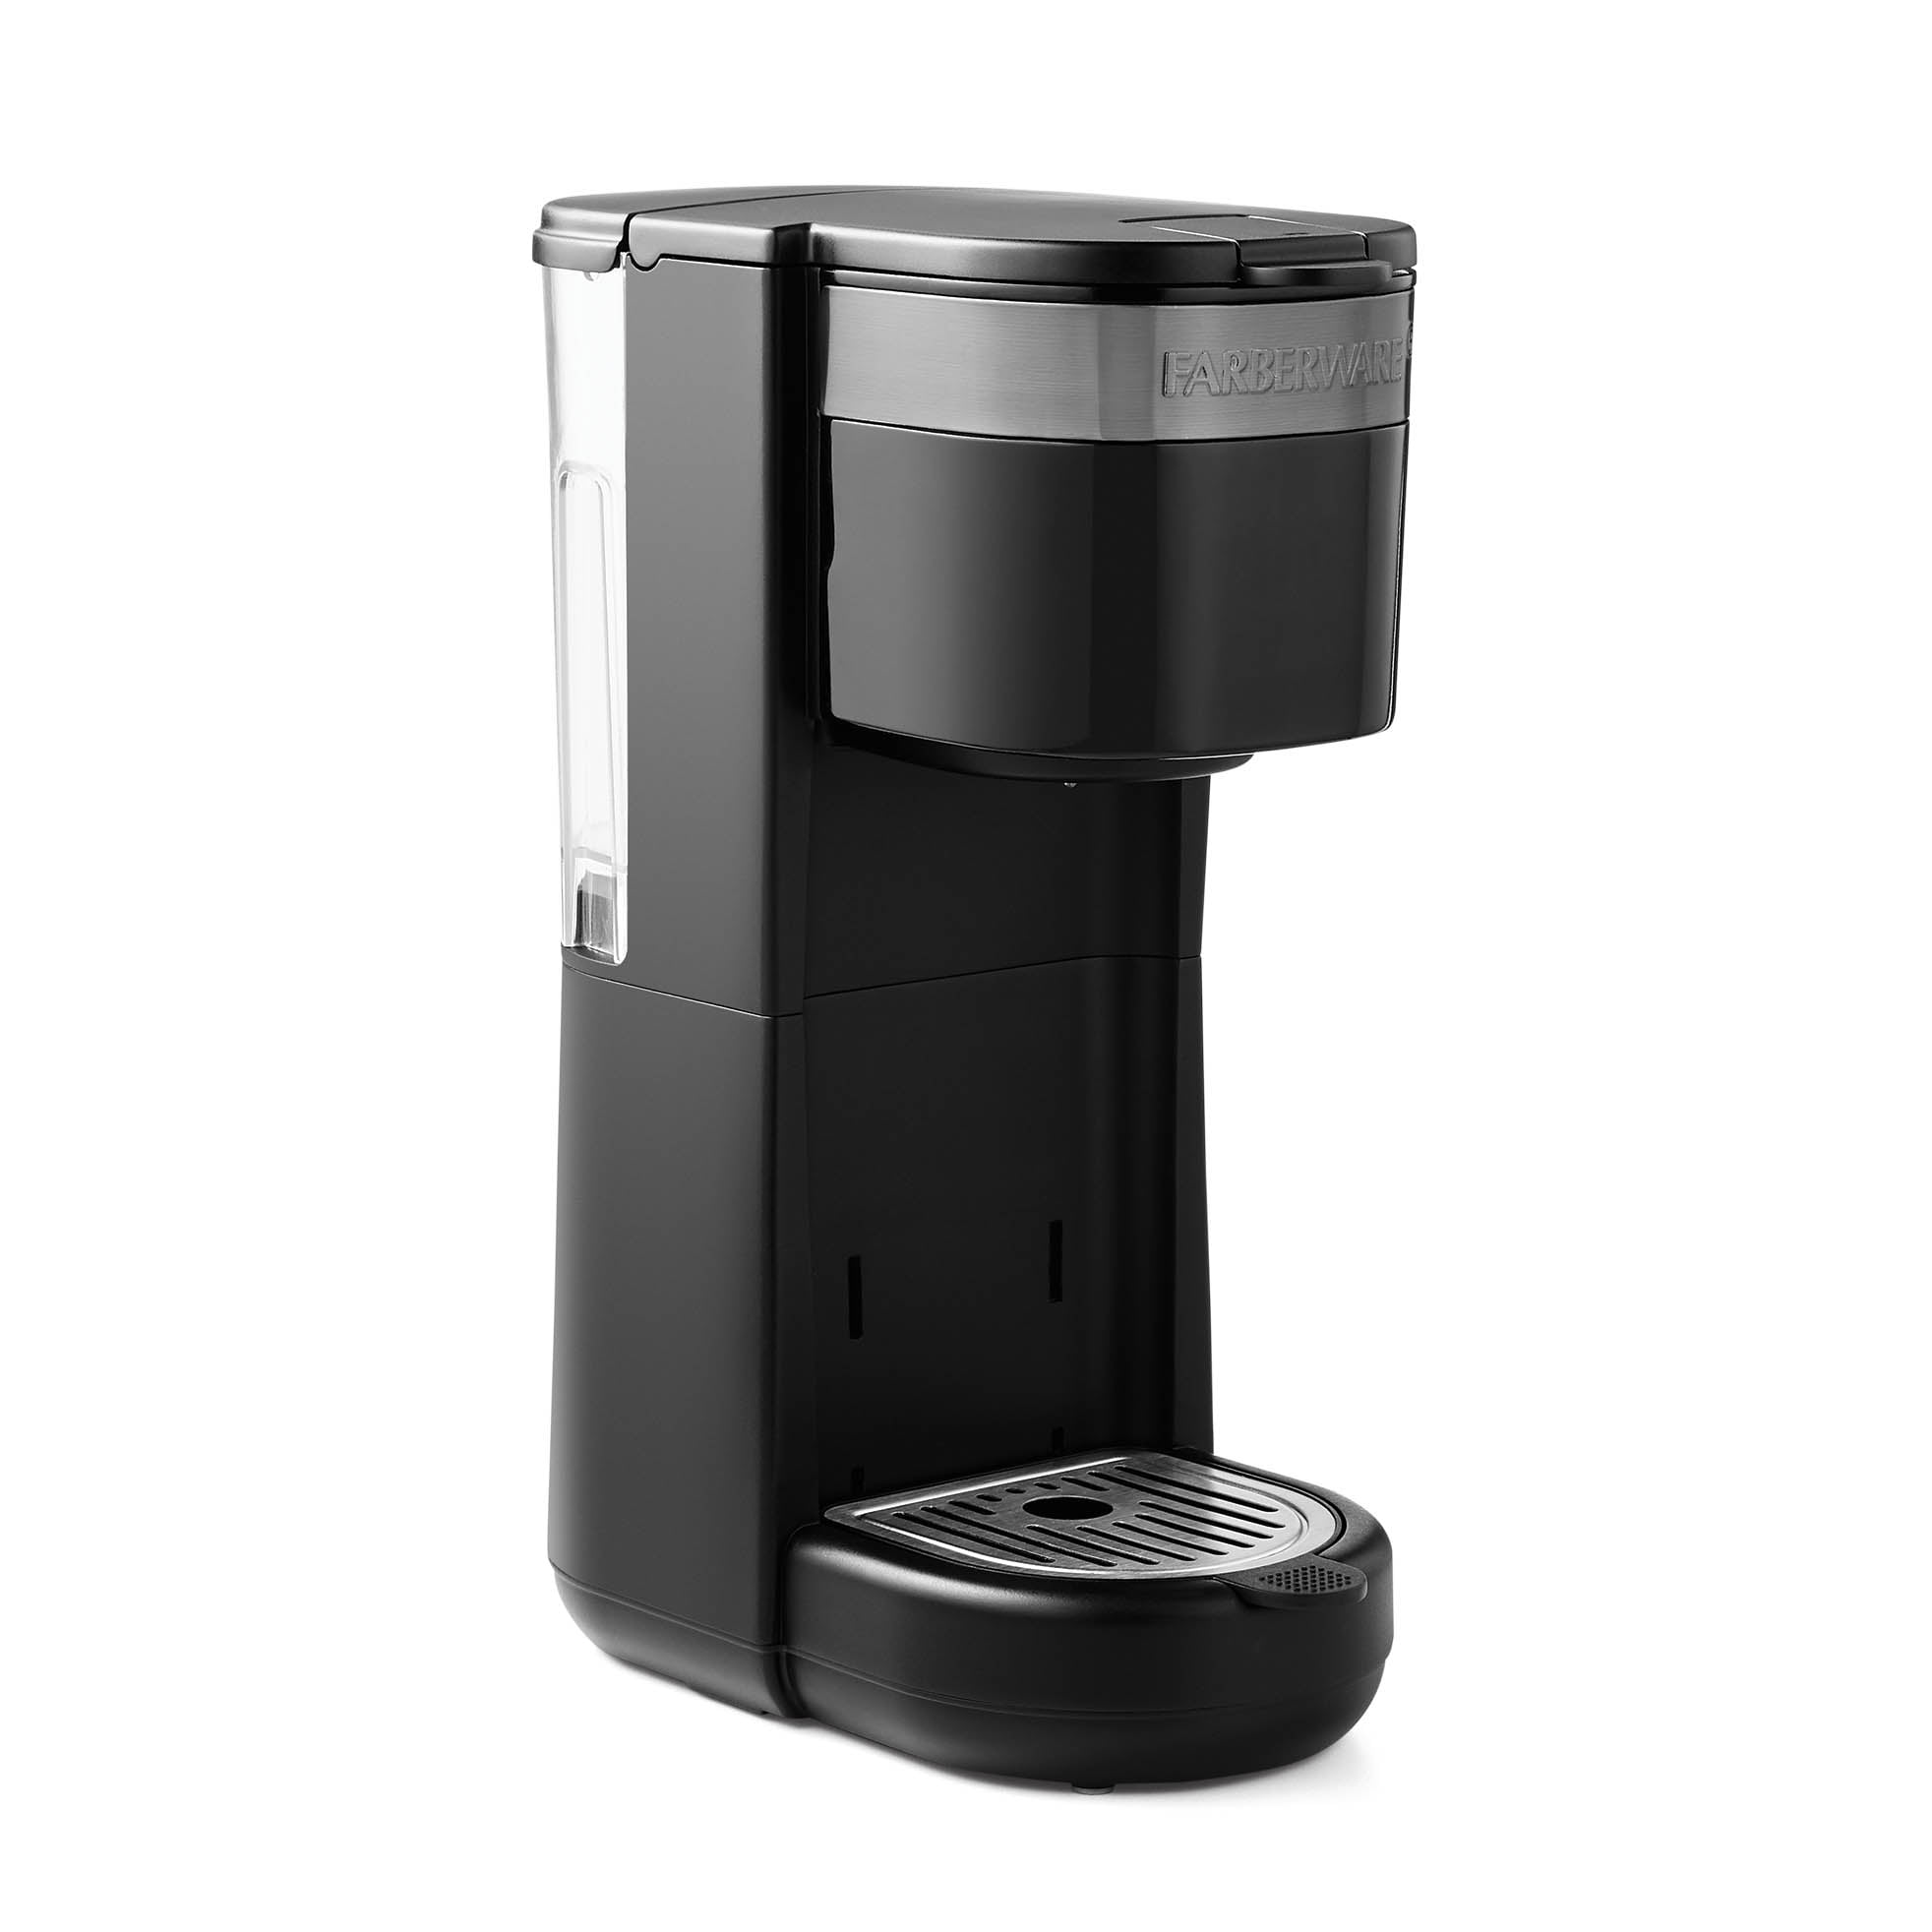 Chefman Instabrew Single Serve Coffee Maker Brewer for K-Cup Pods Coffee-Ground 